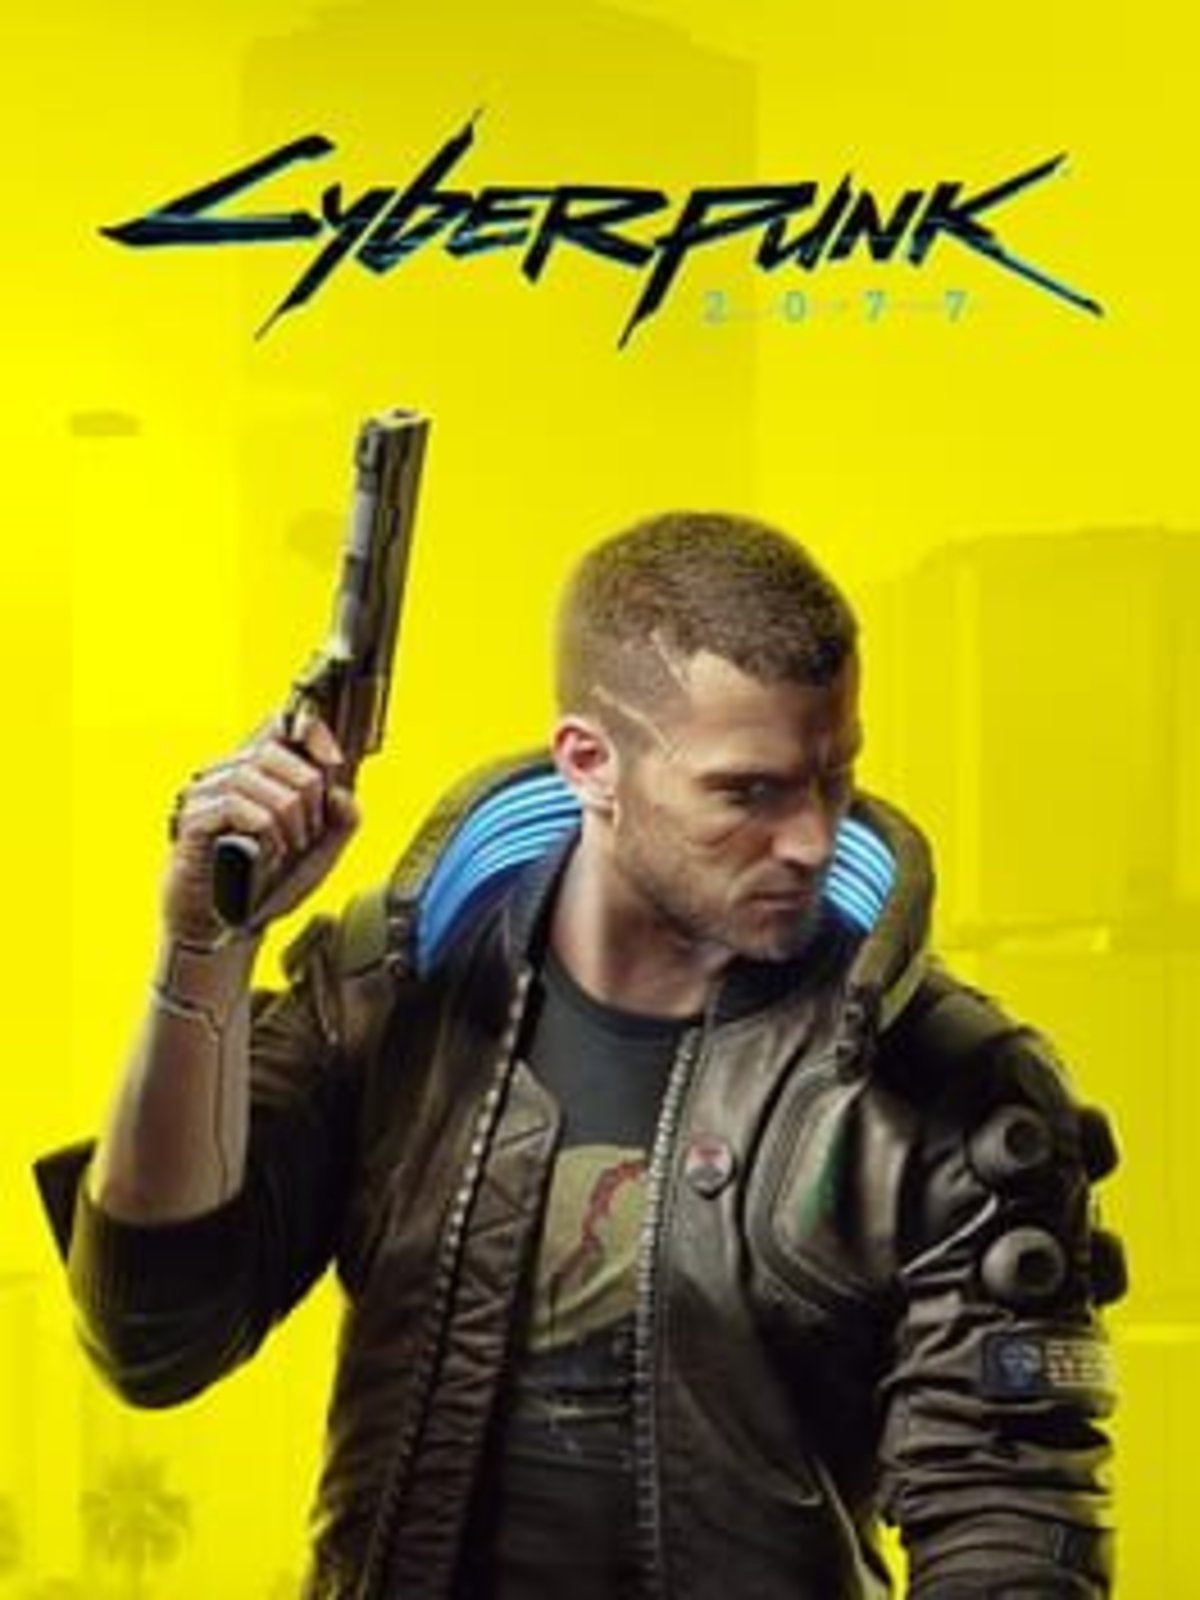 It has cost its own, but finally Cyberpunk 2077 begins to receive positive reviews